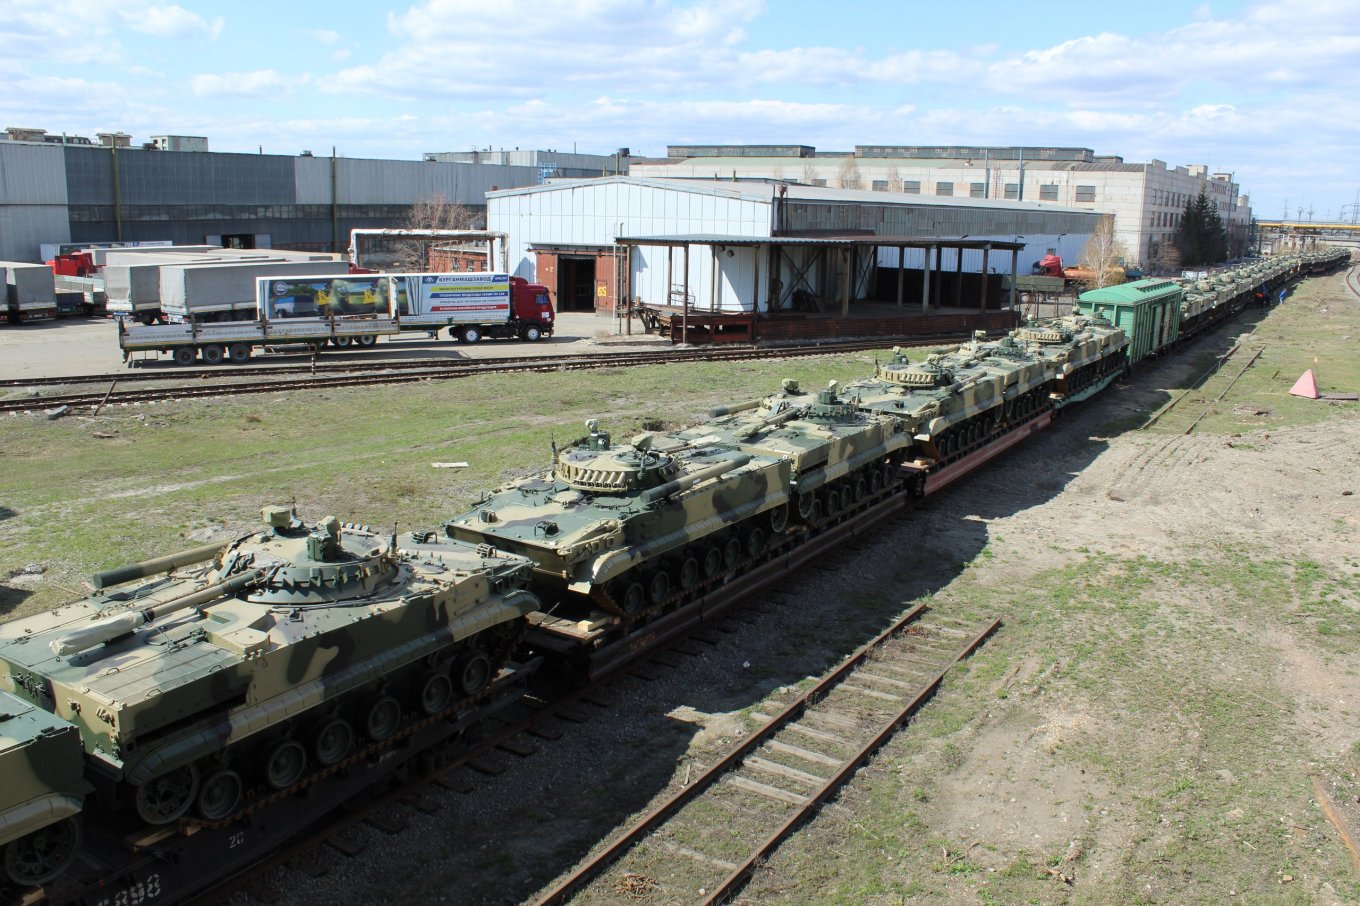 A shipment of BMP-3 vehicles from Kurganmashzavod armor plant, May 2023 / Defense Express / Army of russia Expects to Receive 1,500 Tanks, 3,000 IFVs in 2024–2025 and Scale Up BMP-3 Production